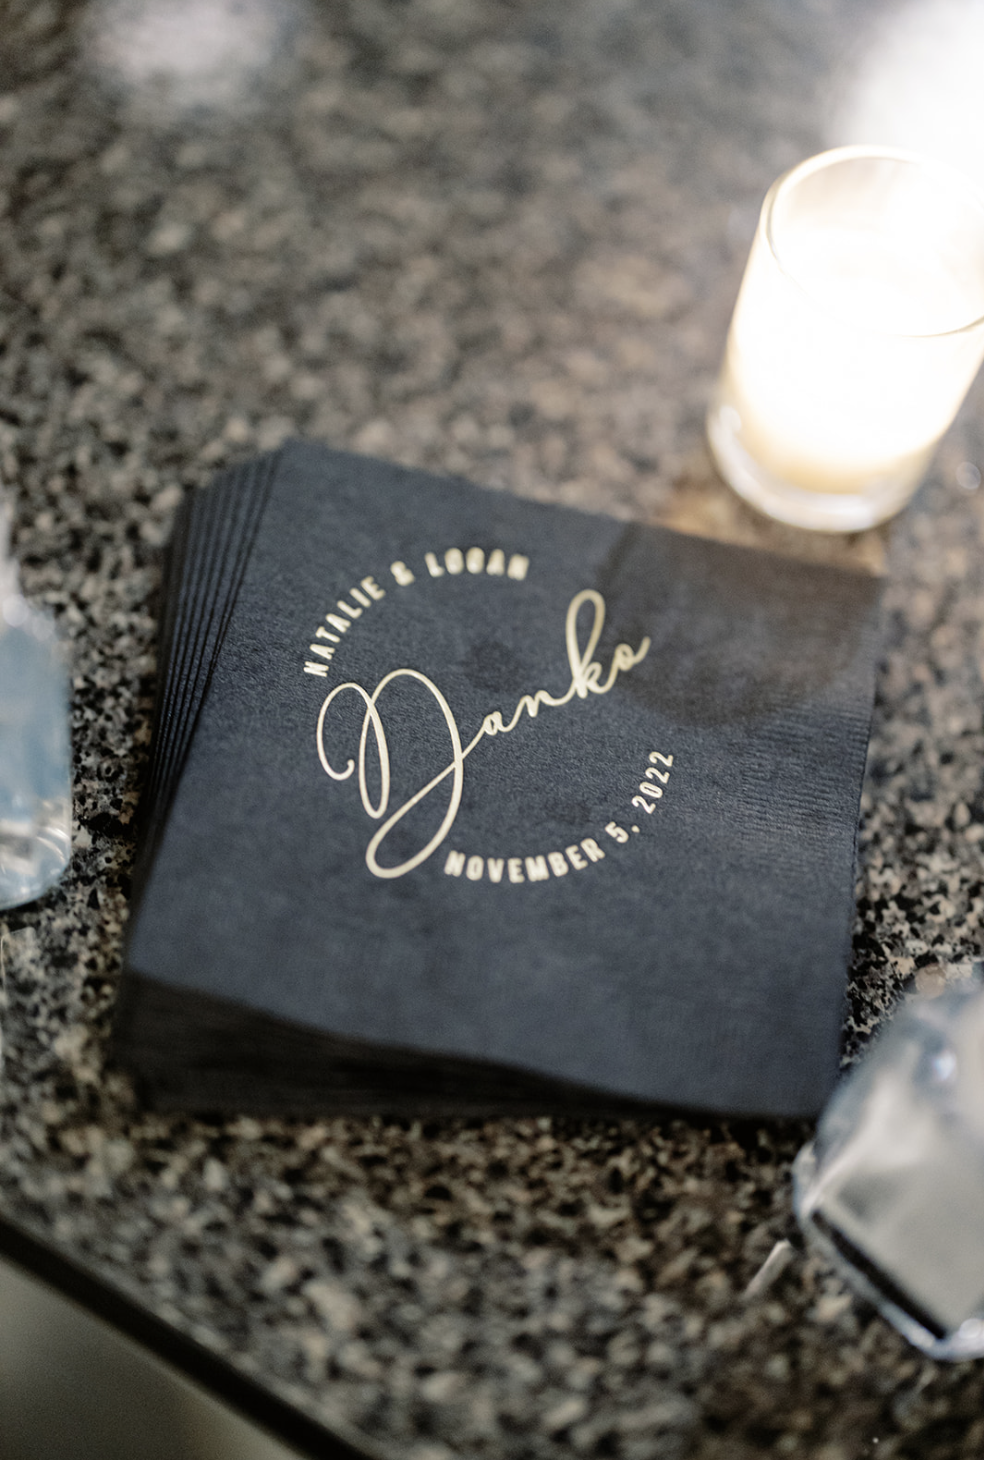 Personalized black napkins with gold foil display name and wedding date at Harold Washington Library reception.